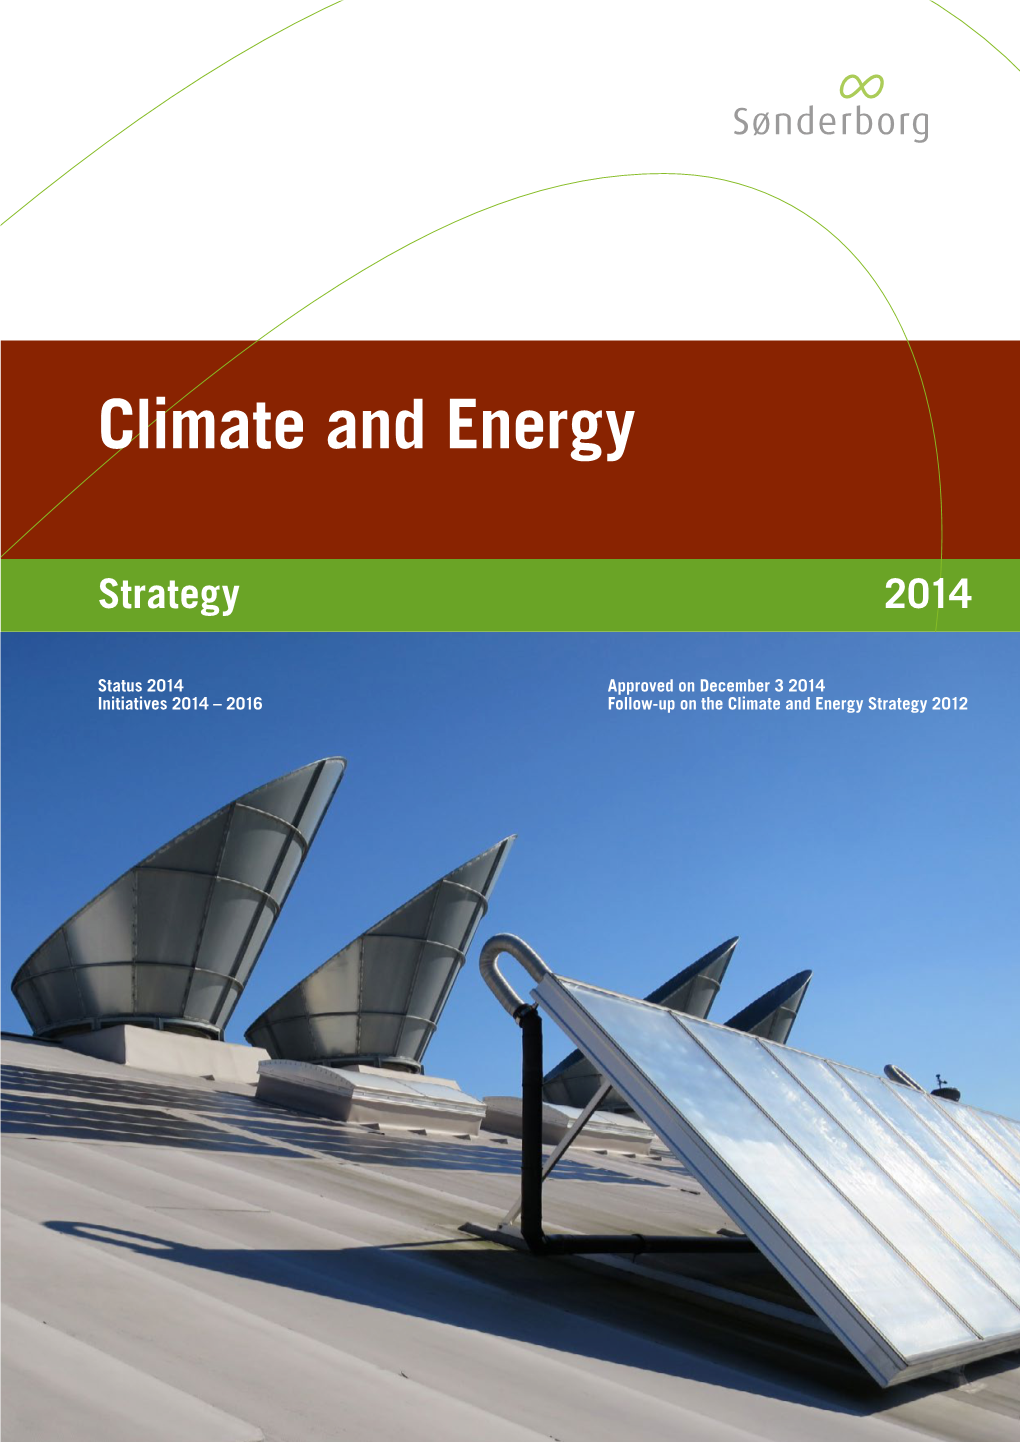 Climate and Energy Strategy 2014 – Summary